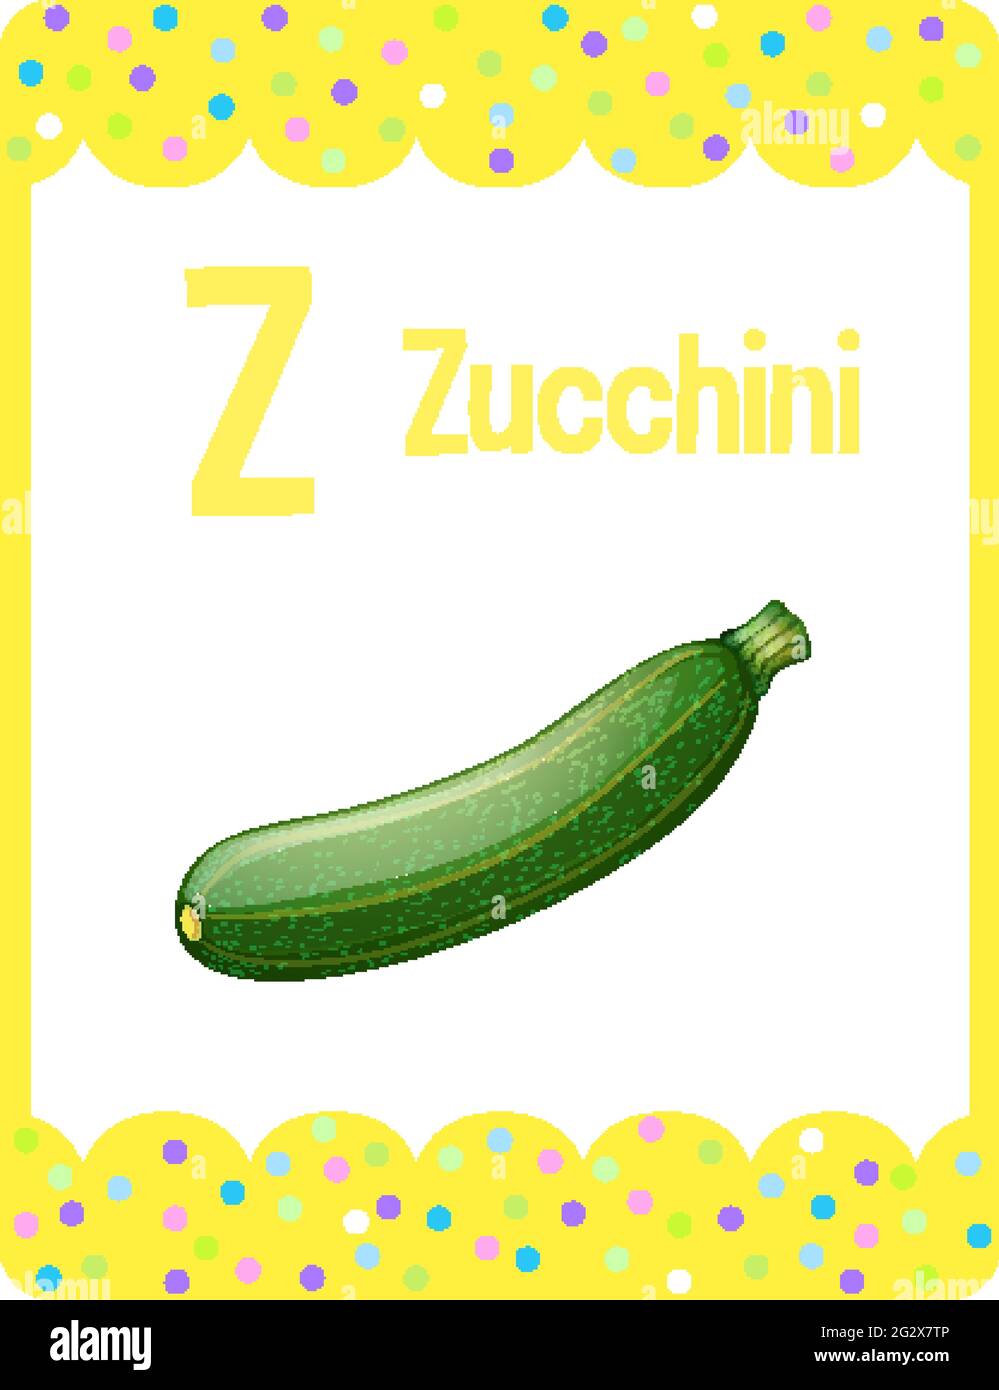 Alphabet flashcard with letter Z for Zucchini illustration Stock Vector